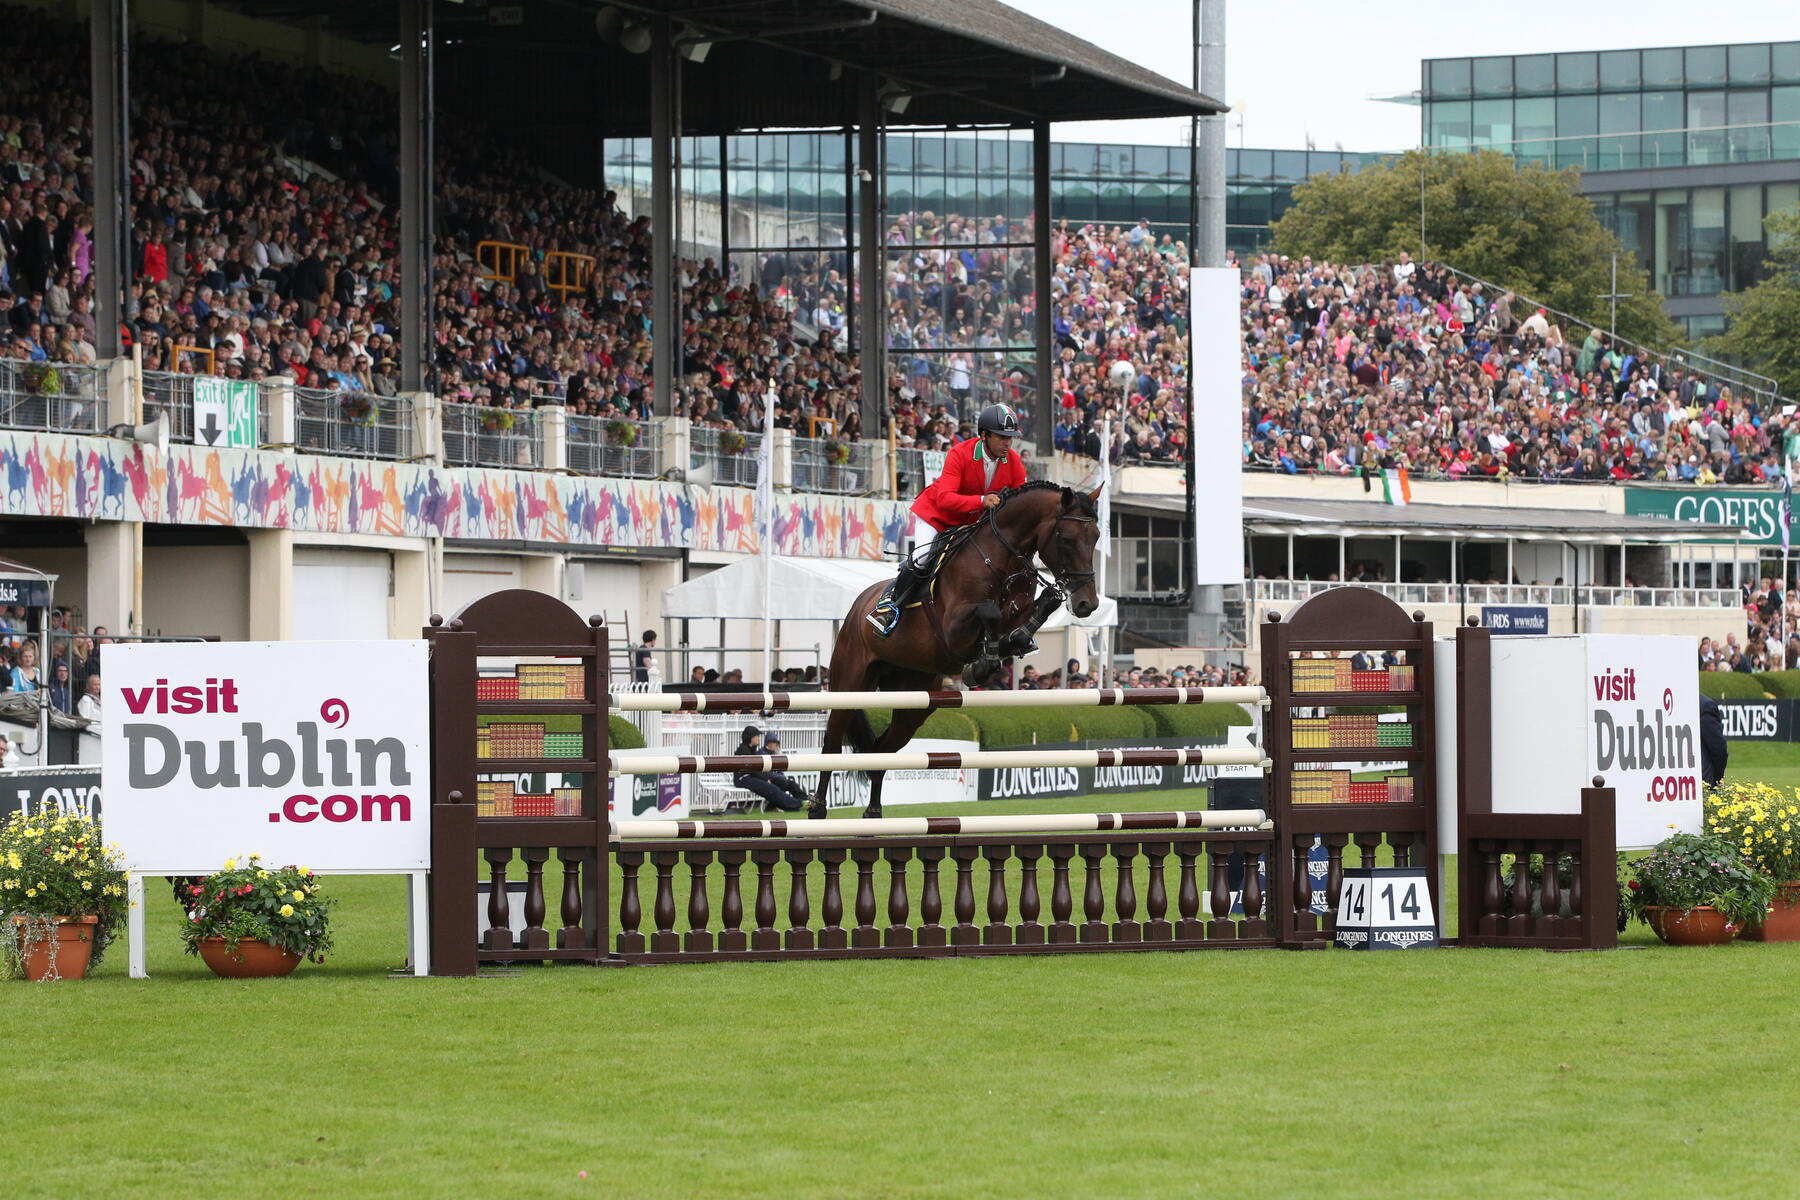 11-facts-about-dublin-horse-show